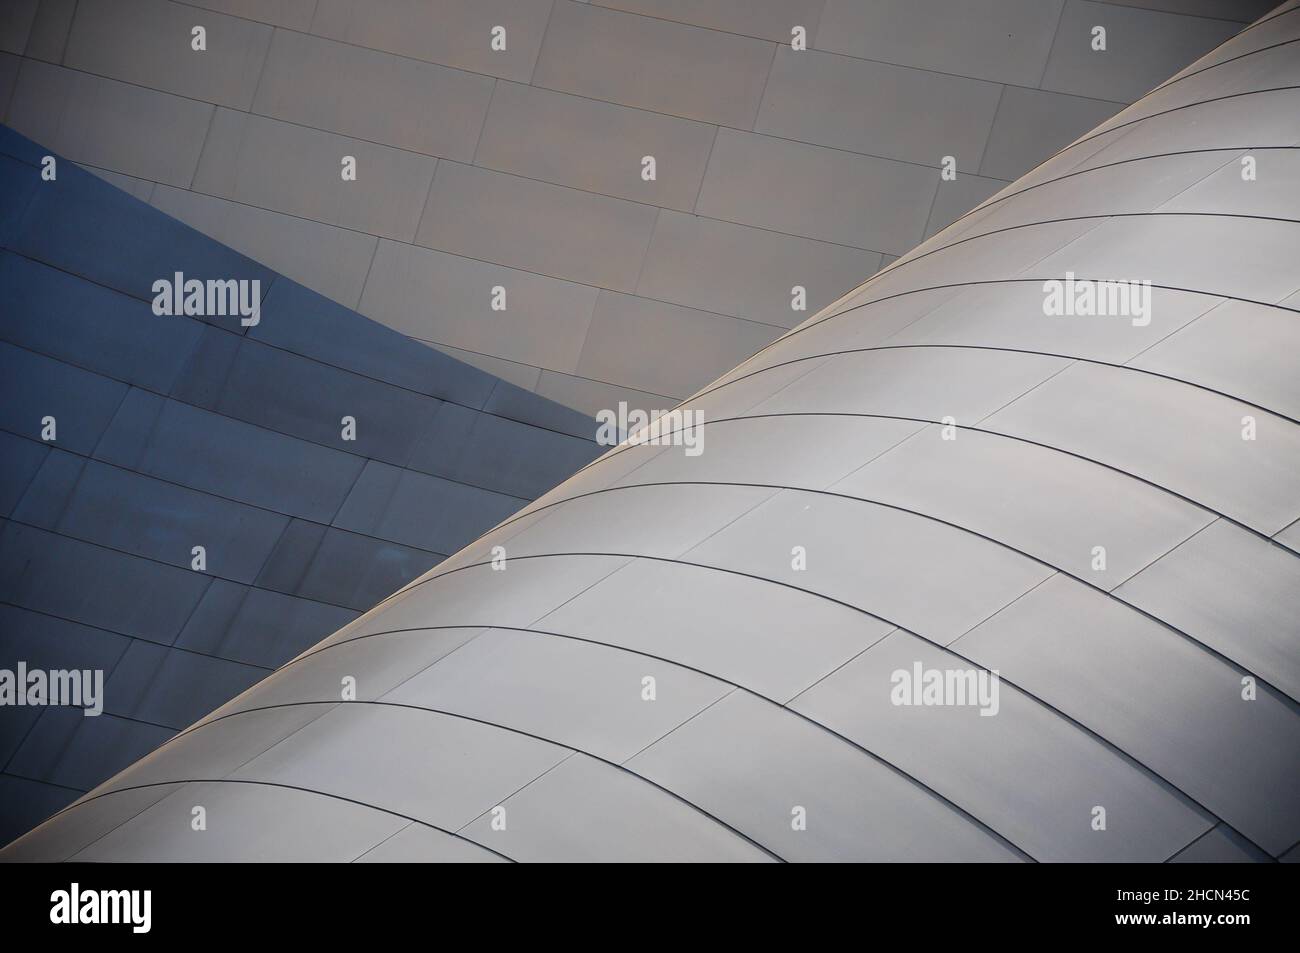 LOS ANGELES - JAN 7, 2012: Details of the roof of Walt Disney Concert Hall in Los Angeles, California, USA on June 7, 2012. Stock Photo